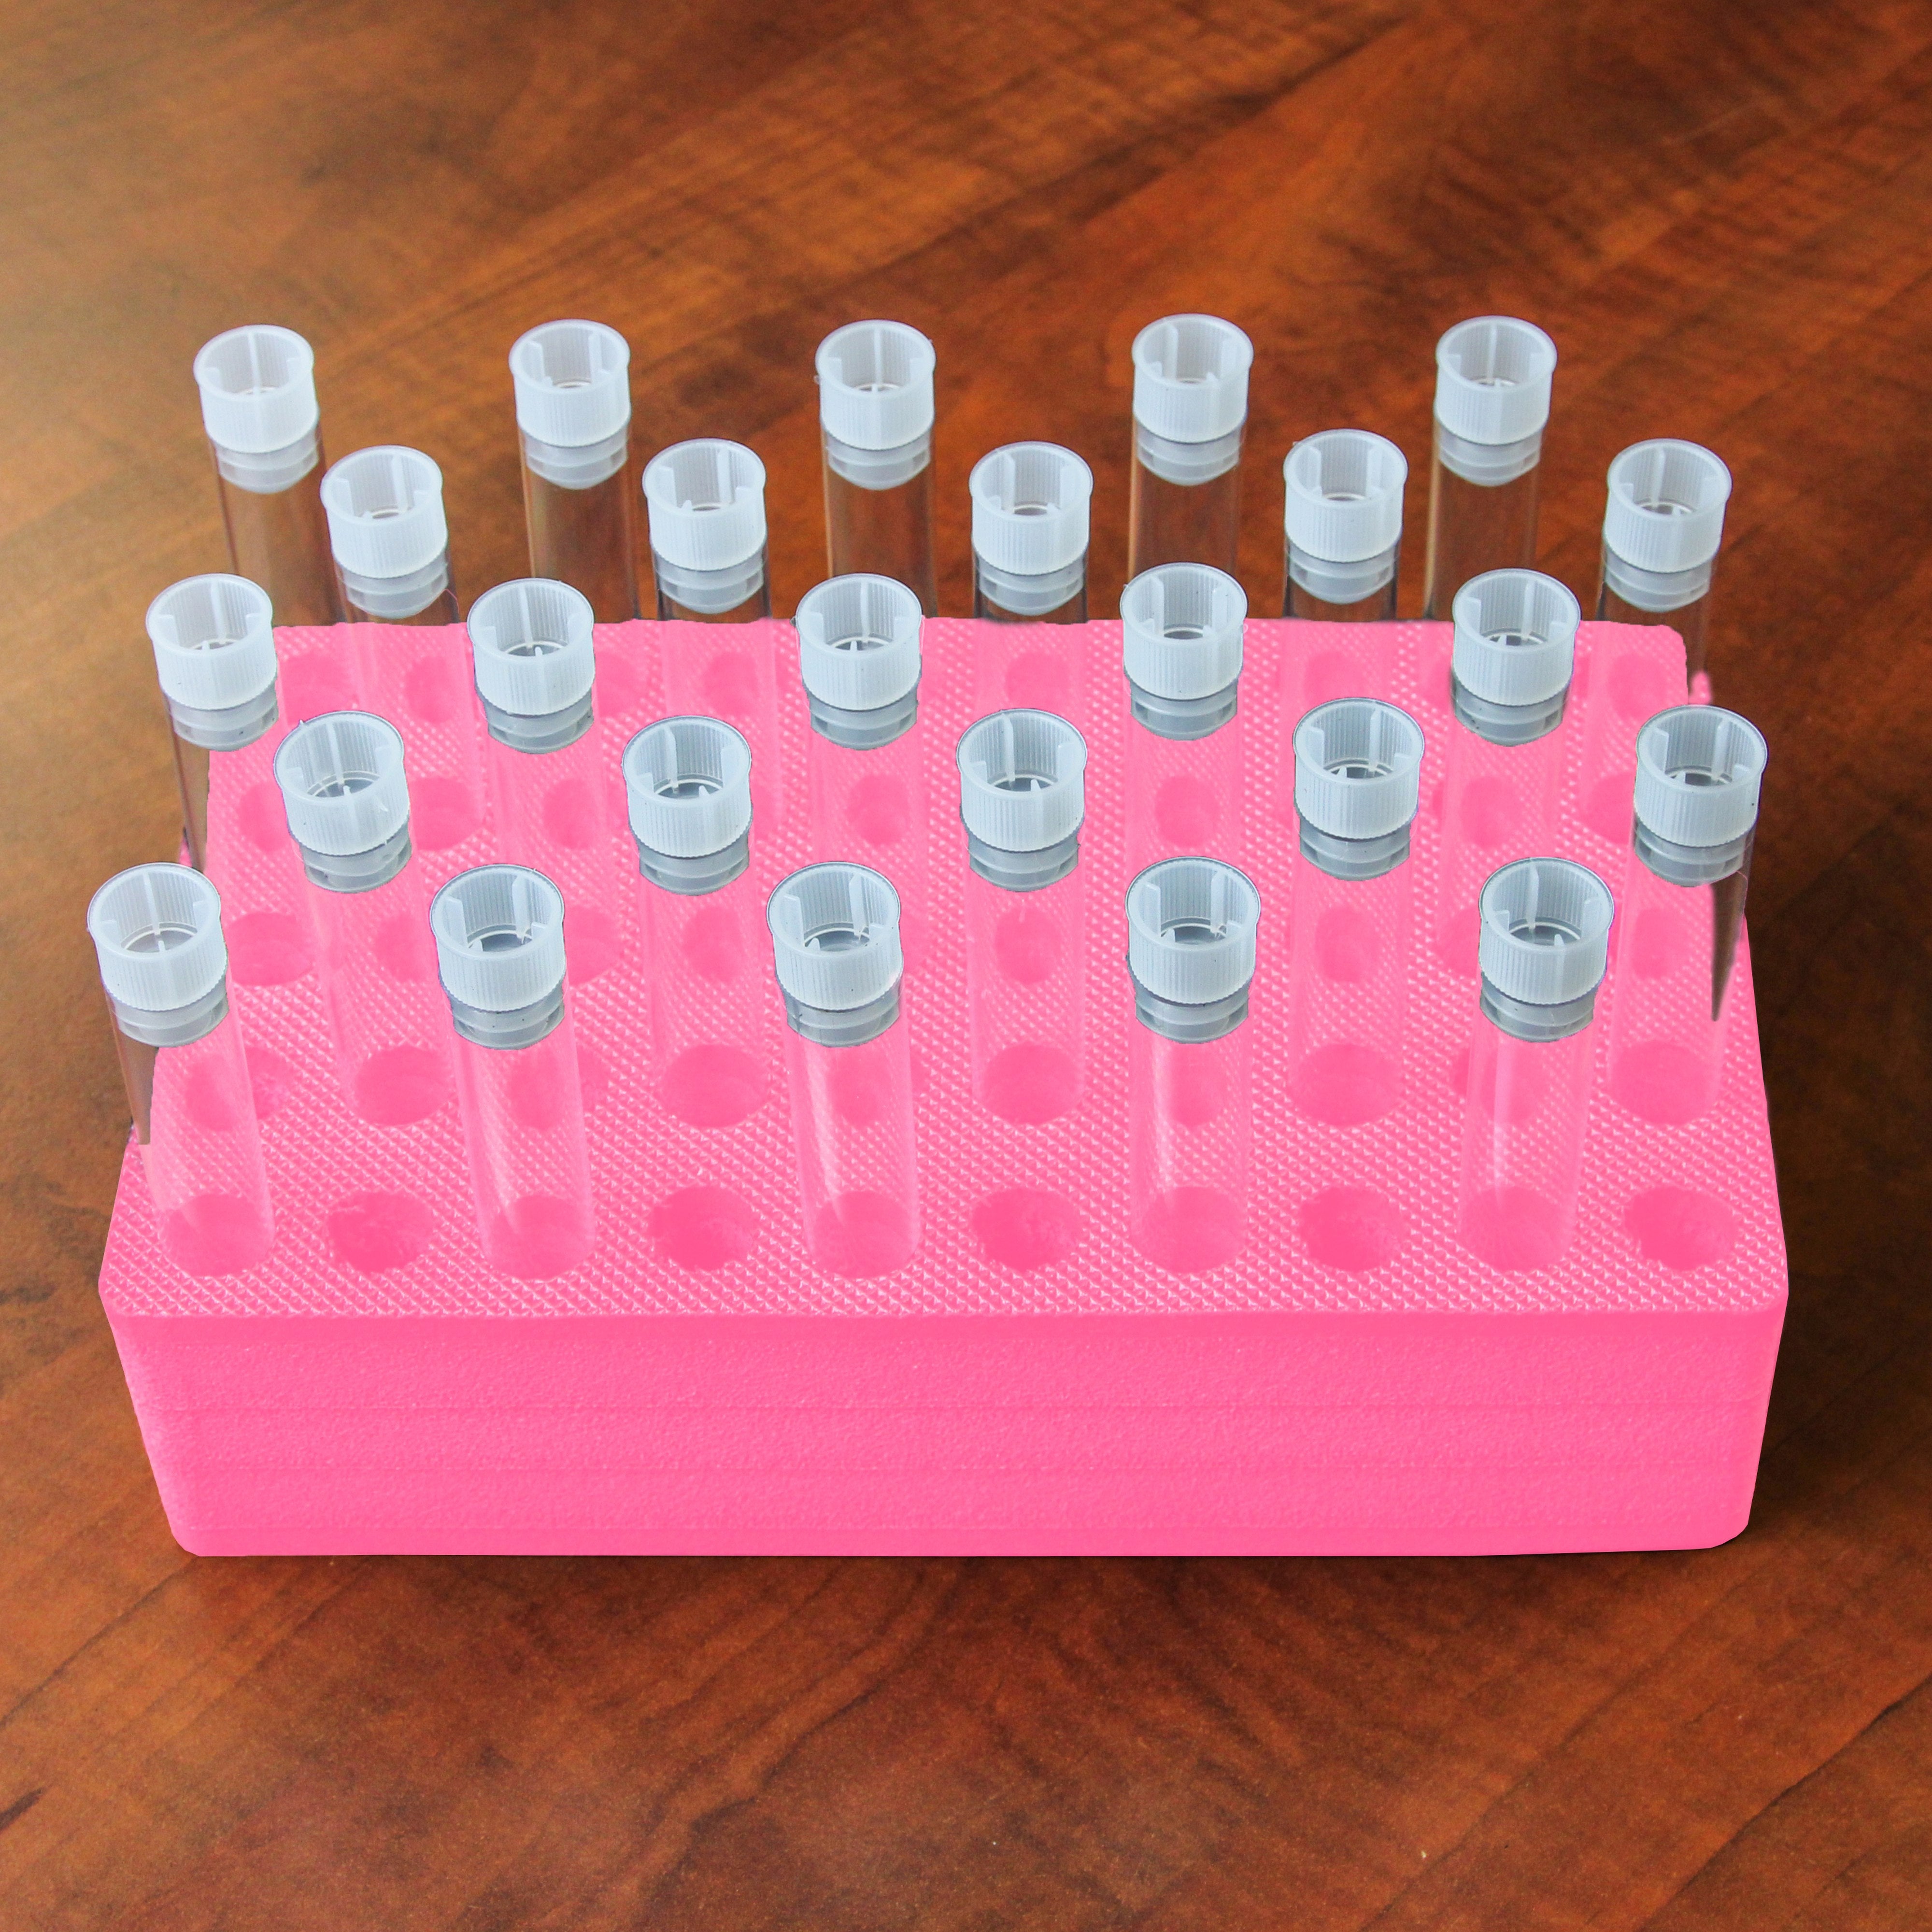 Polar Whale Test Tube Rack Pink Foam Storage Rack Organizer Stand Transport Holds 50 Tubes Fits up to 15mm Diameter